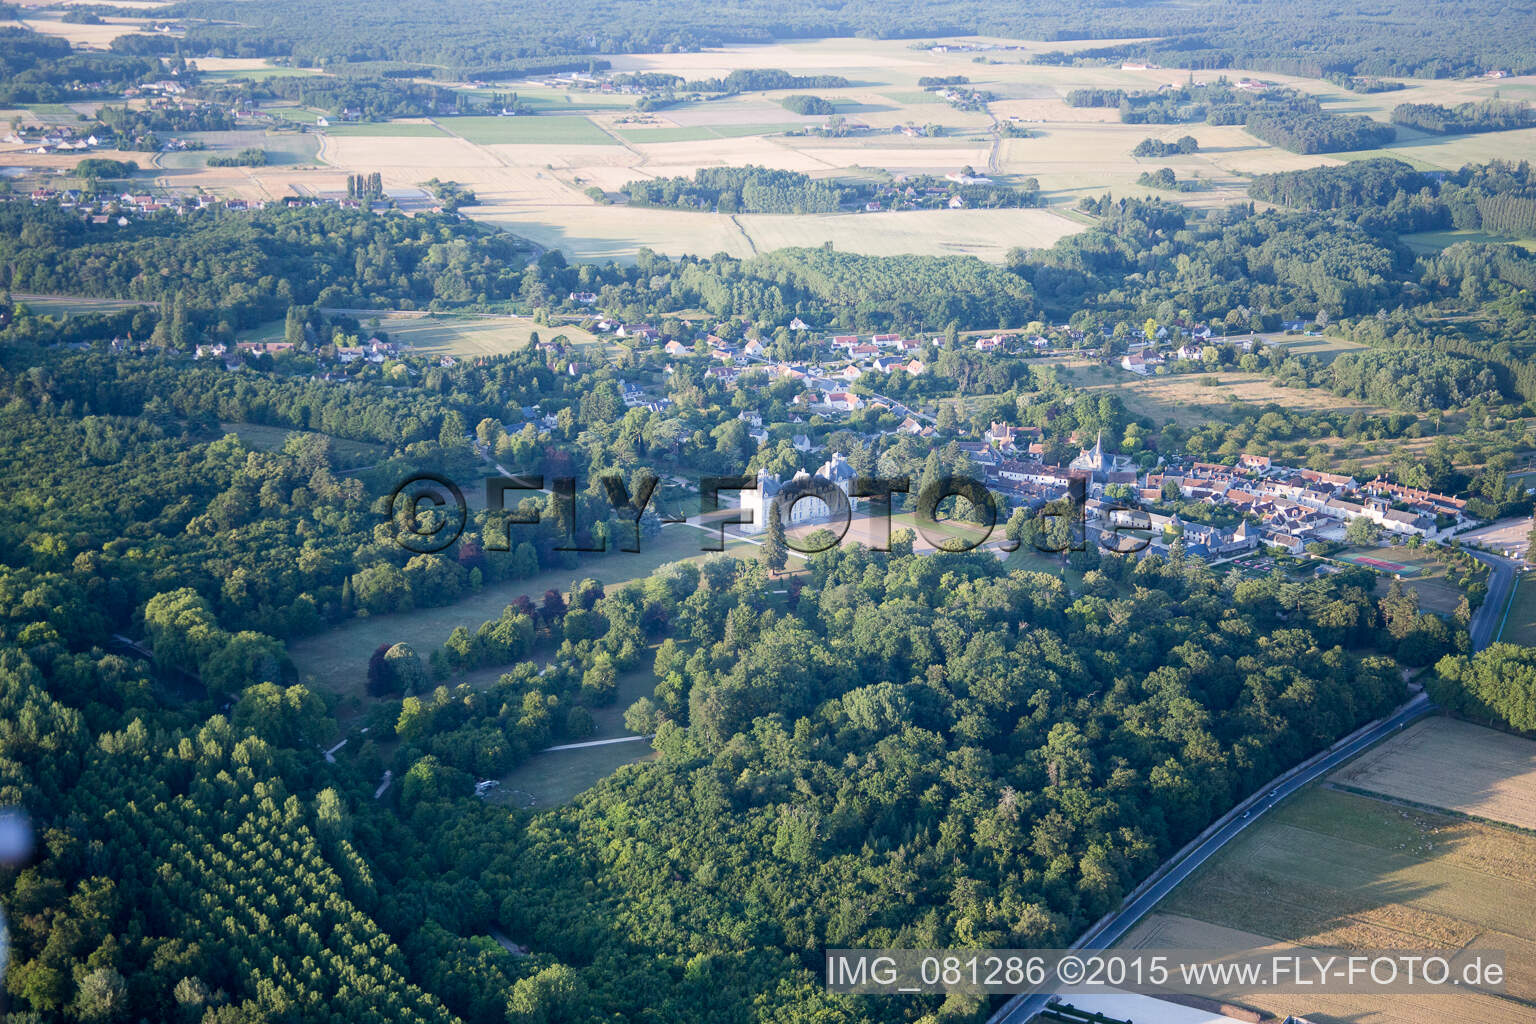 Aerial photograpy of Castle Cheverny - Chateau de Cheverny in Cheverny in Centre-Val de Loire, France